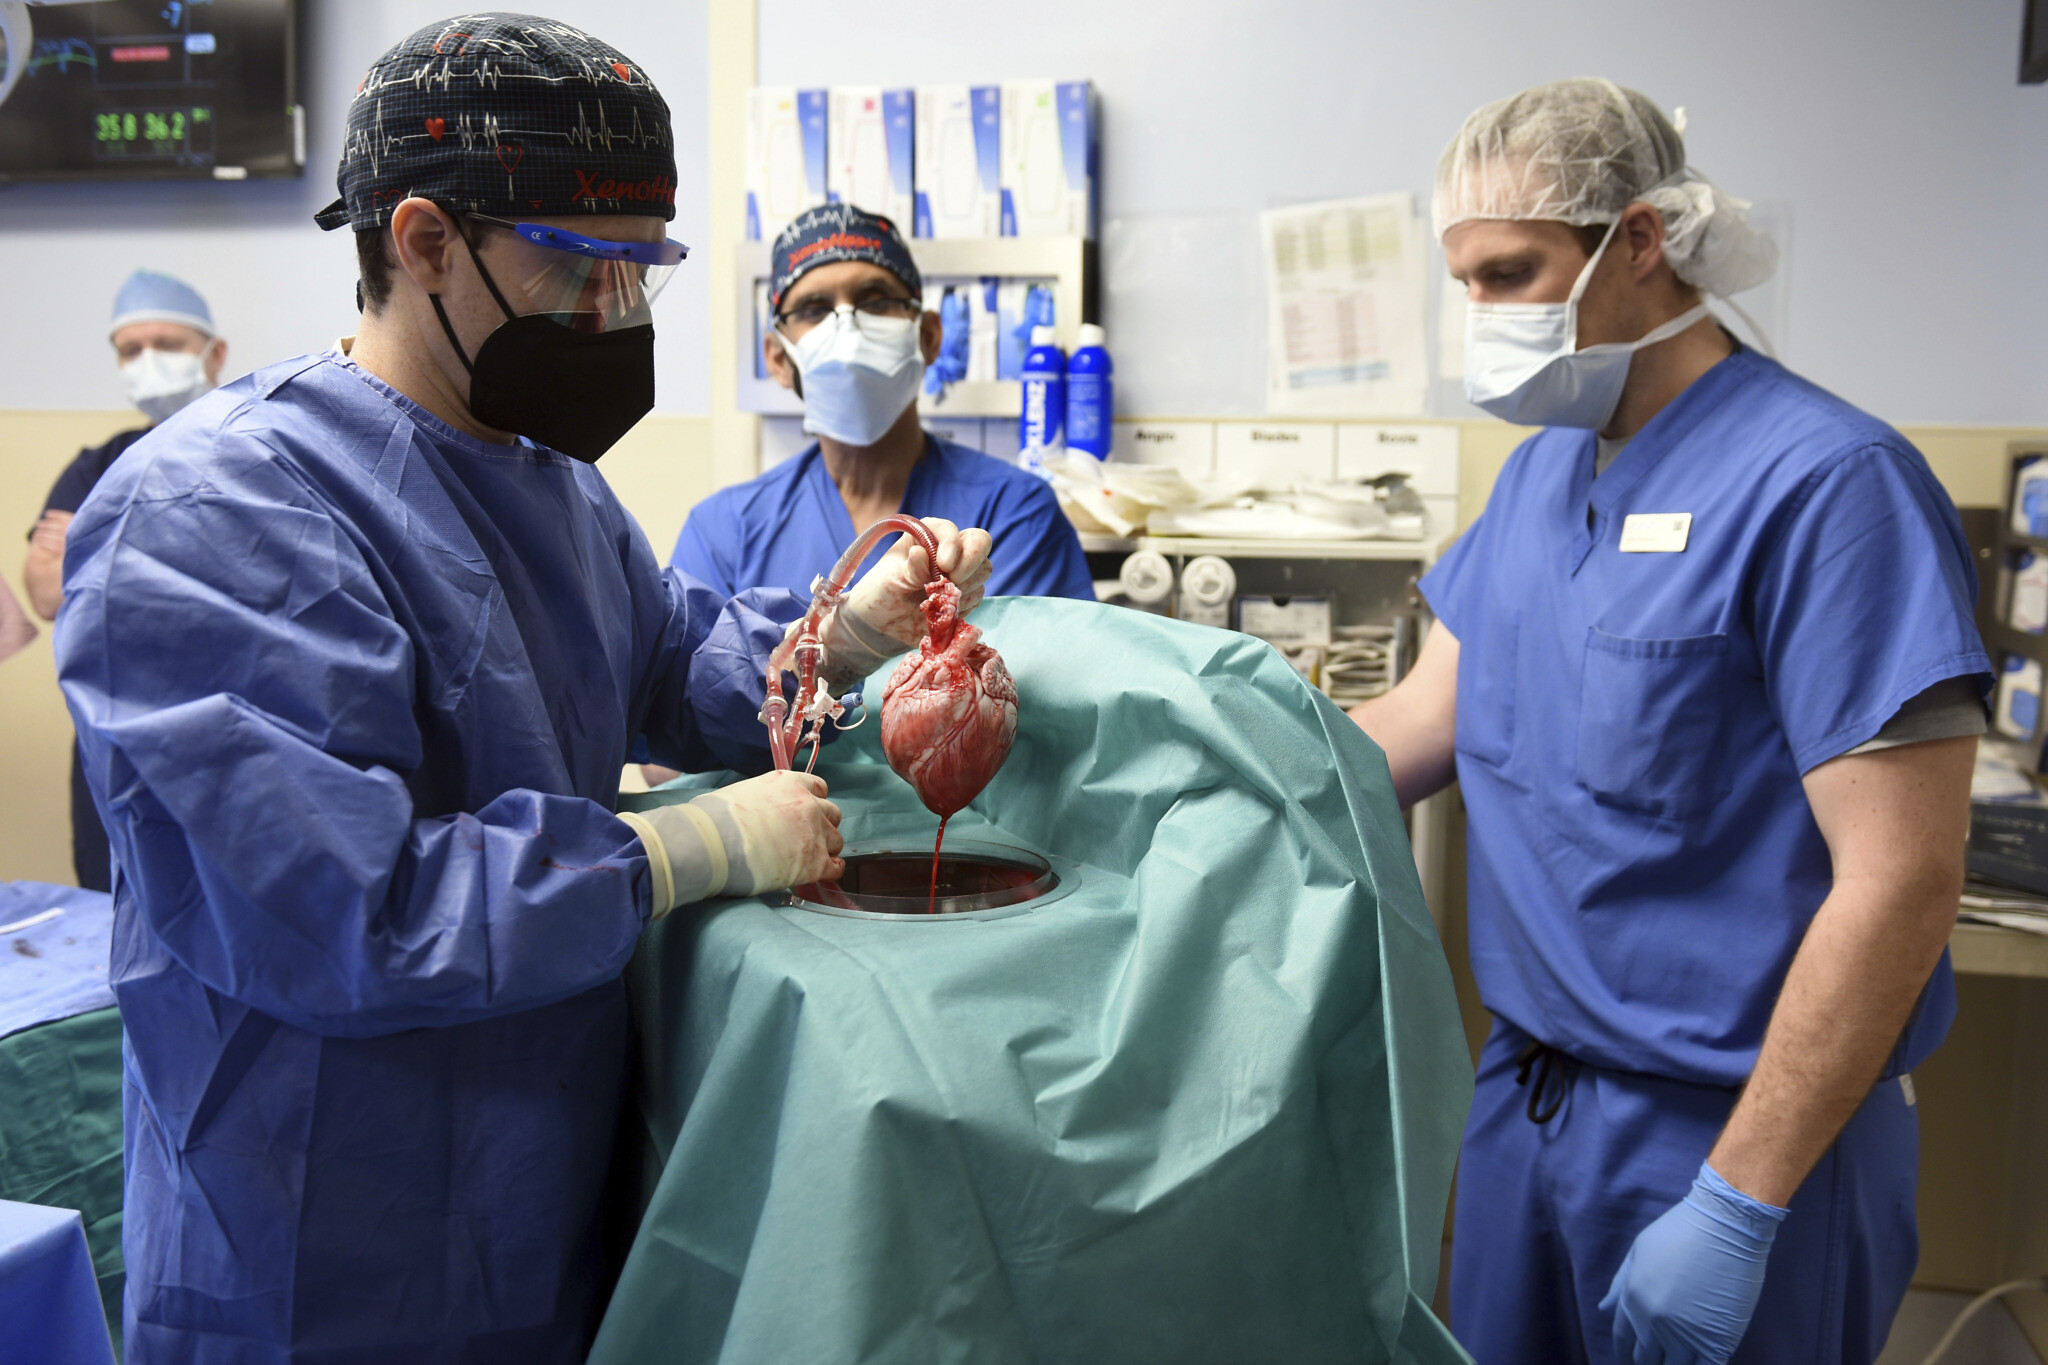 In world first, US surgeons successfully transplant a pig heart into human  patient | The Times of Israel